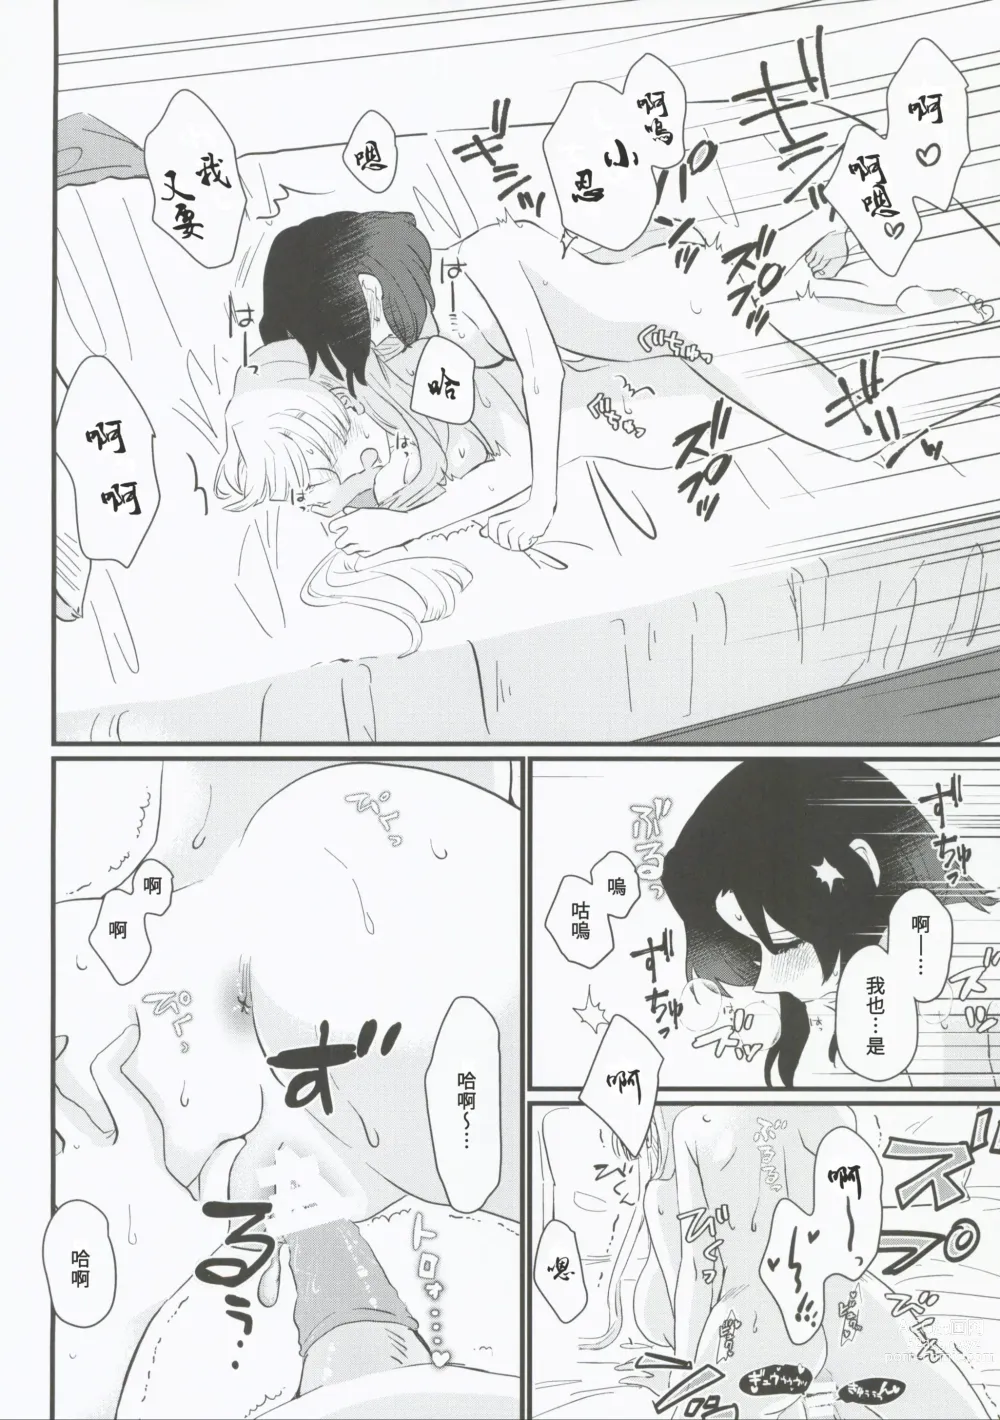 Page 41 of doujinshi 屬於妳的Omega